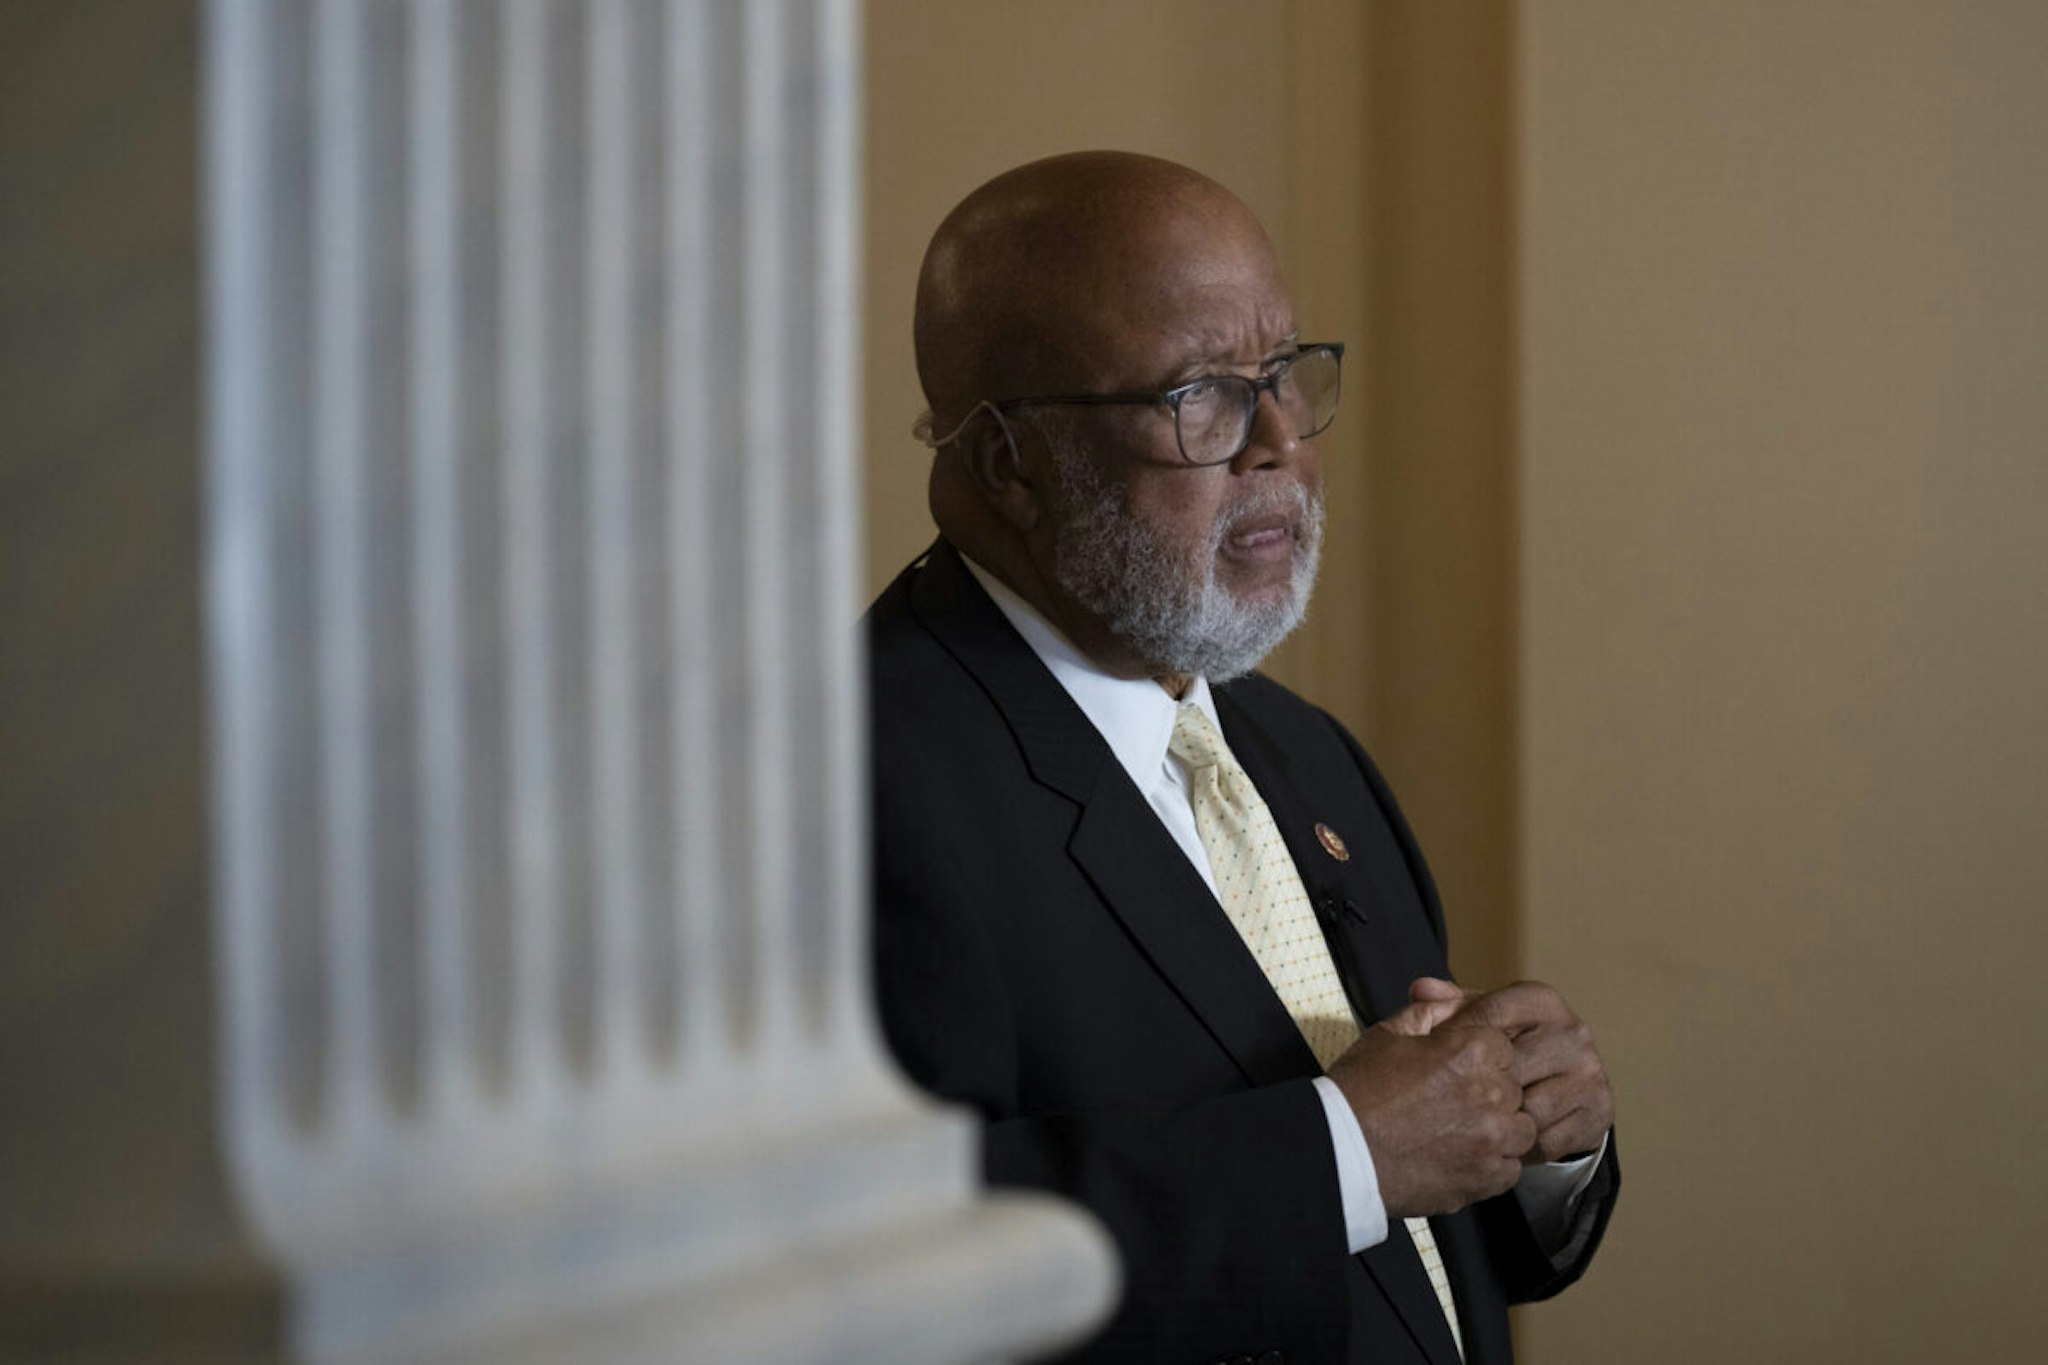 ommittee Chairman Rep. Bennie Thompson (D-MS) does a television interview after leaving the final meeting of the House Select Committee to Investigate the January 6 Attack on the U.S. Capitol in the Canon House Office Building on Capitol Hill on December 19, 2022 in Washington, DC.